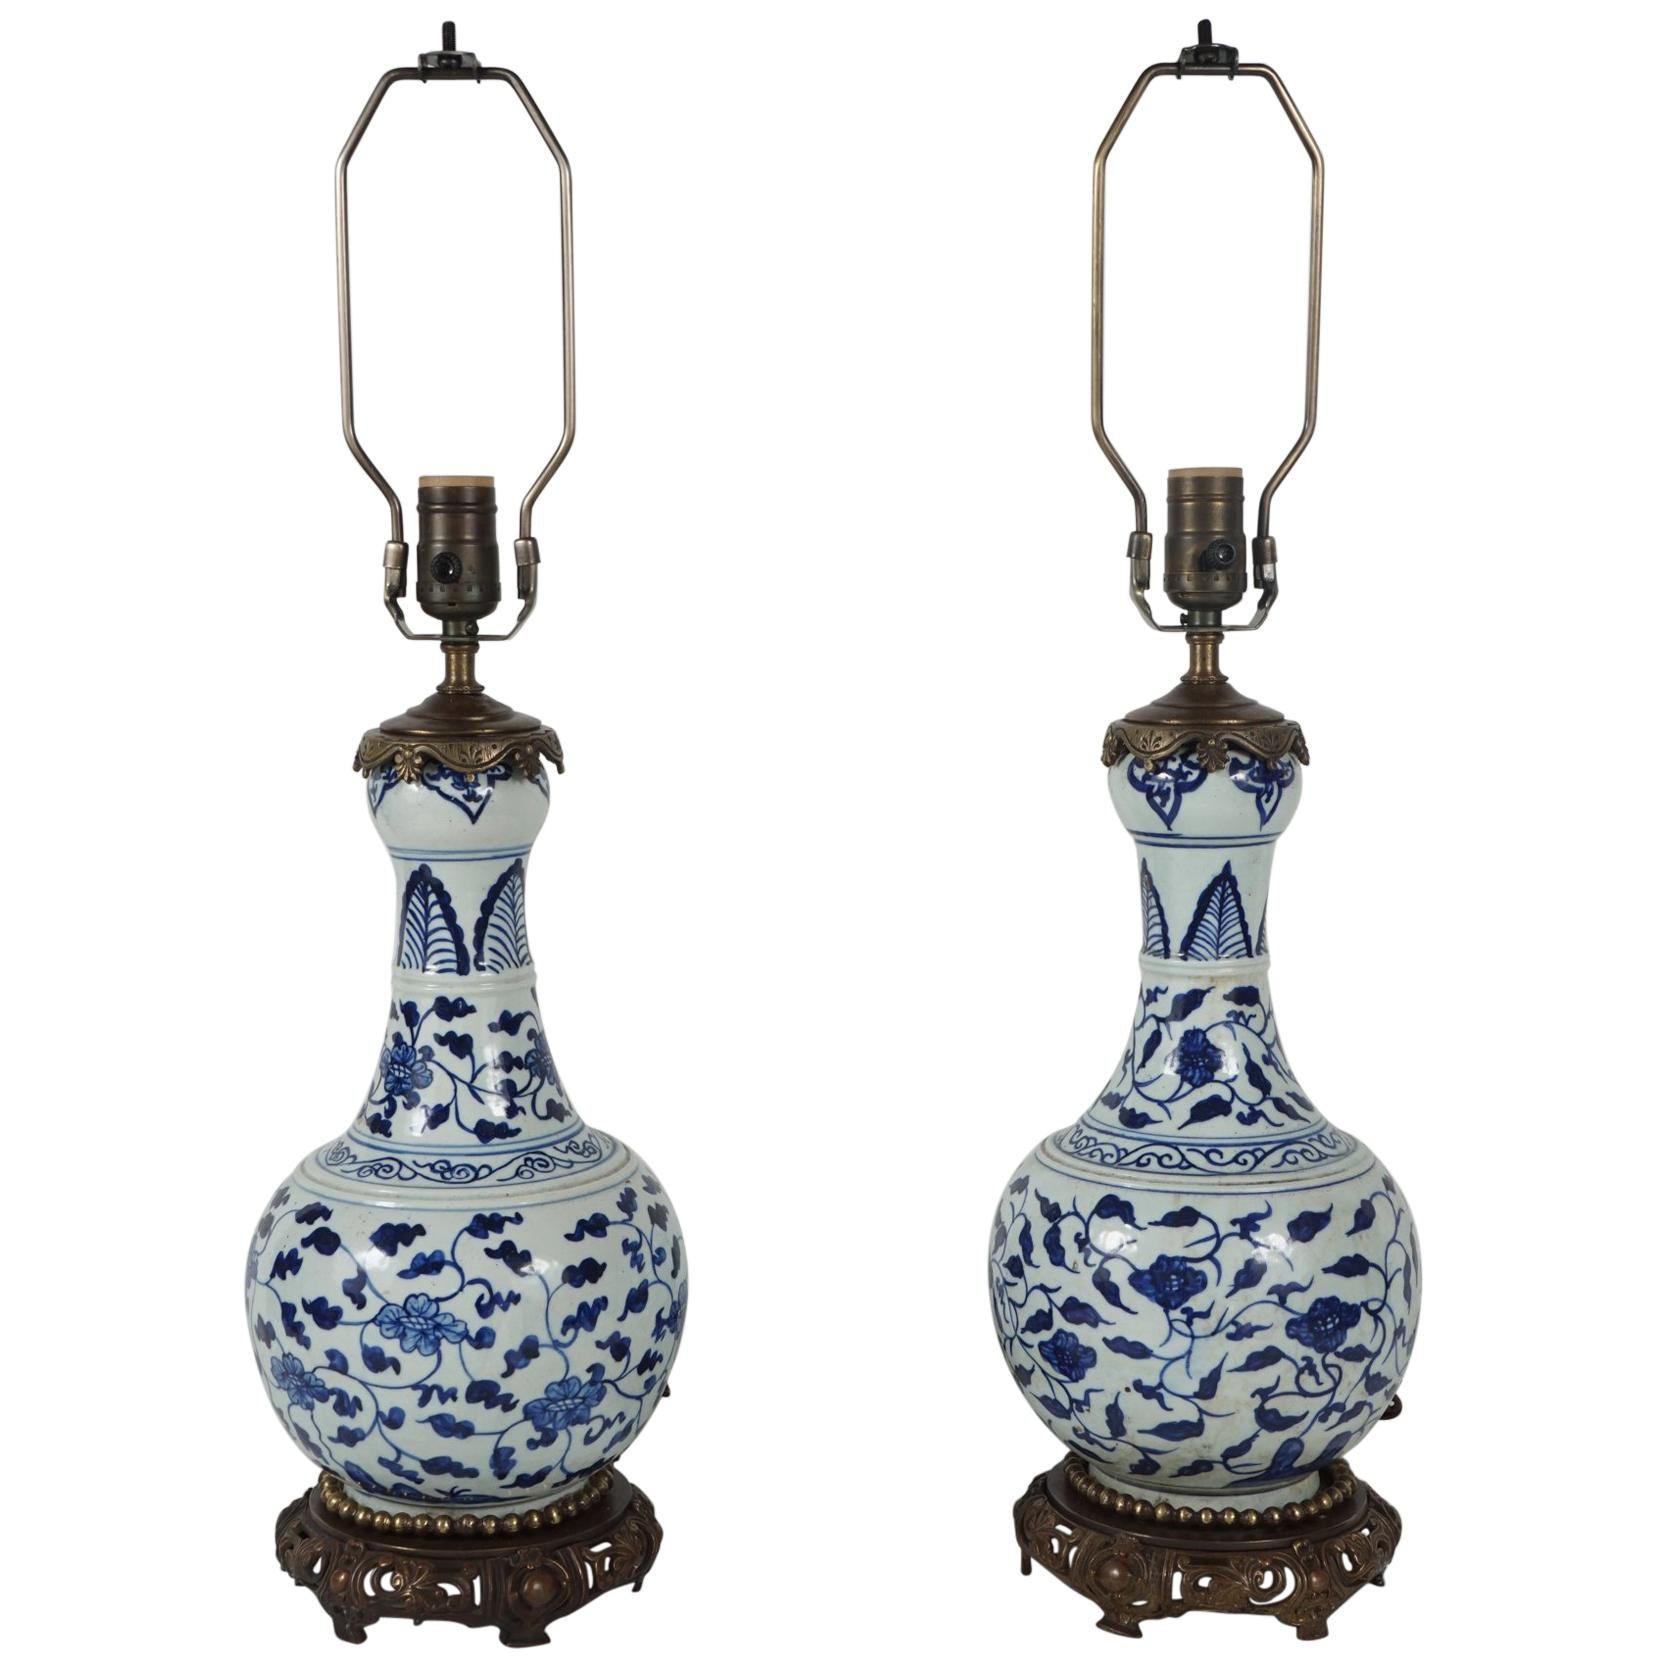 Pair of Bronze Accented Chinese Blue & White Garlic Head Vases Mounted as Lamps